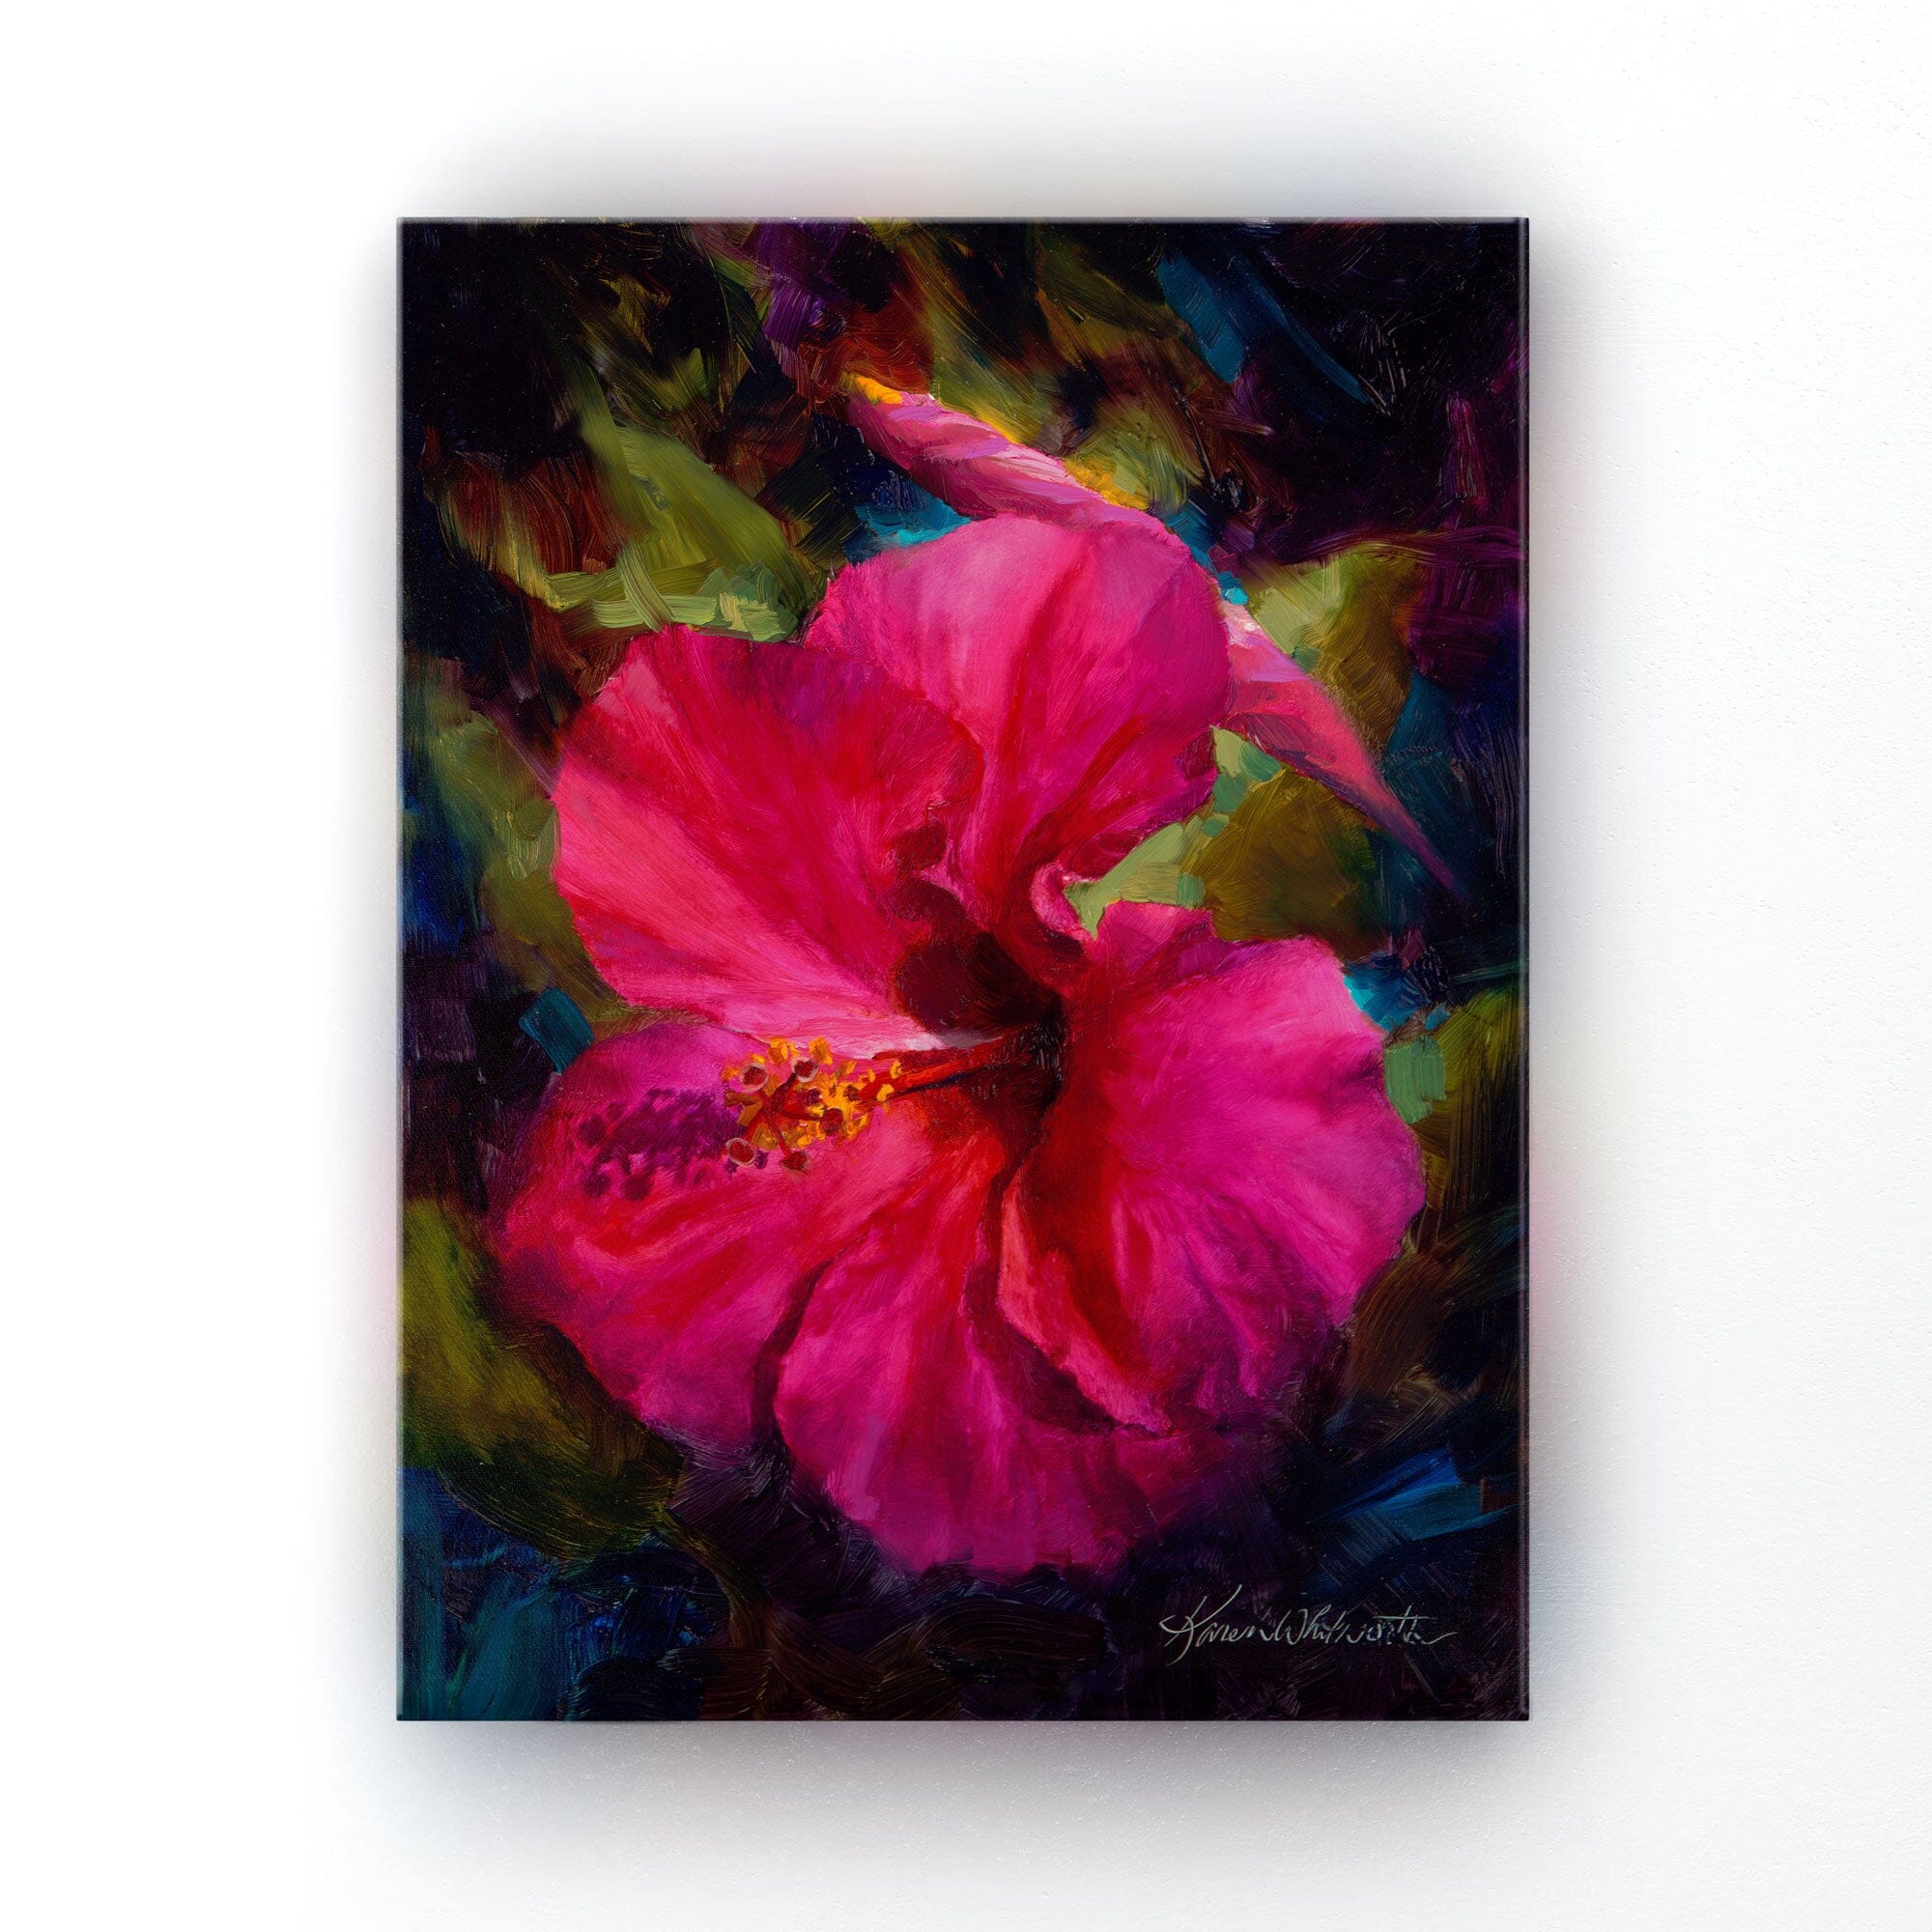 Hawaiian Hibiscus canvas art of pink tropical flower painting by Karen Whitworth. The artwork is hanging on a white wall.